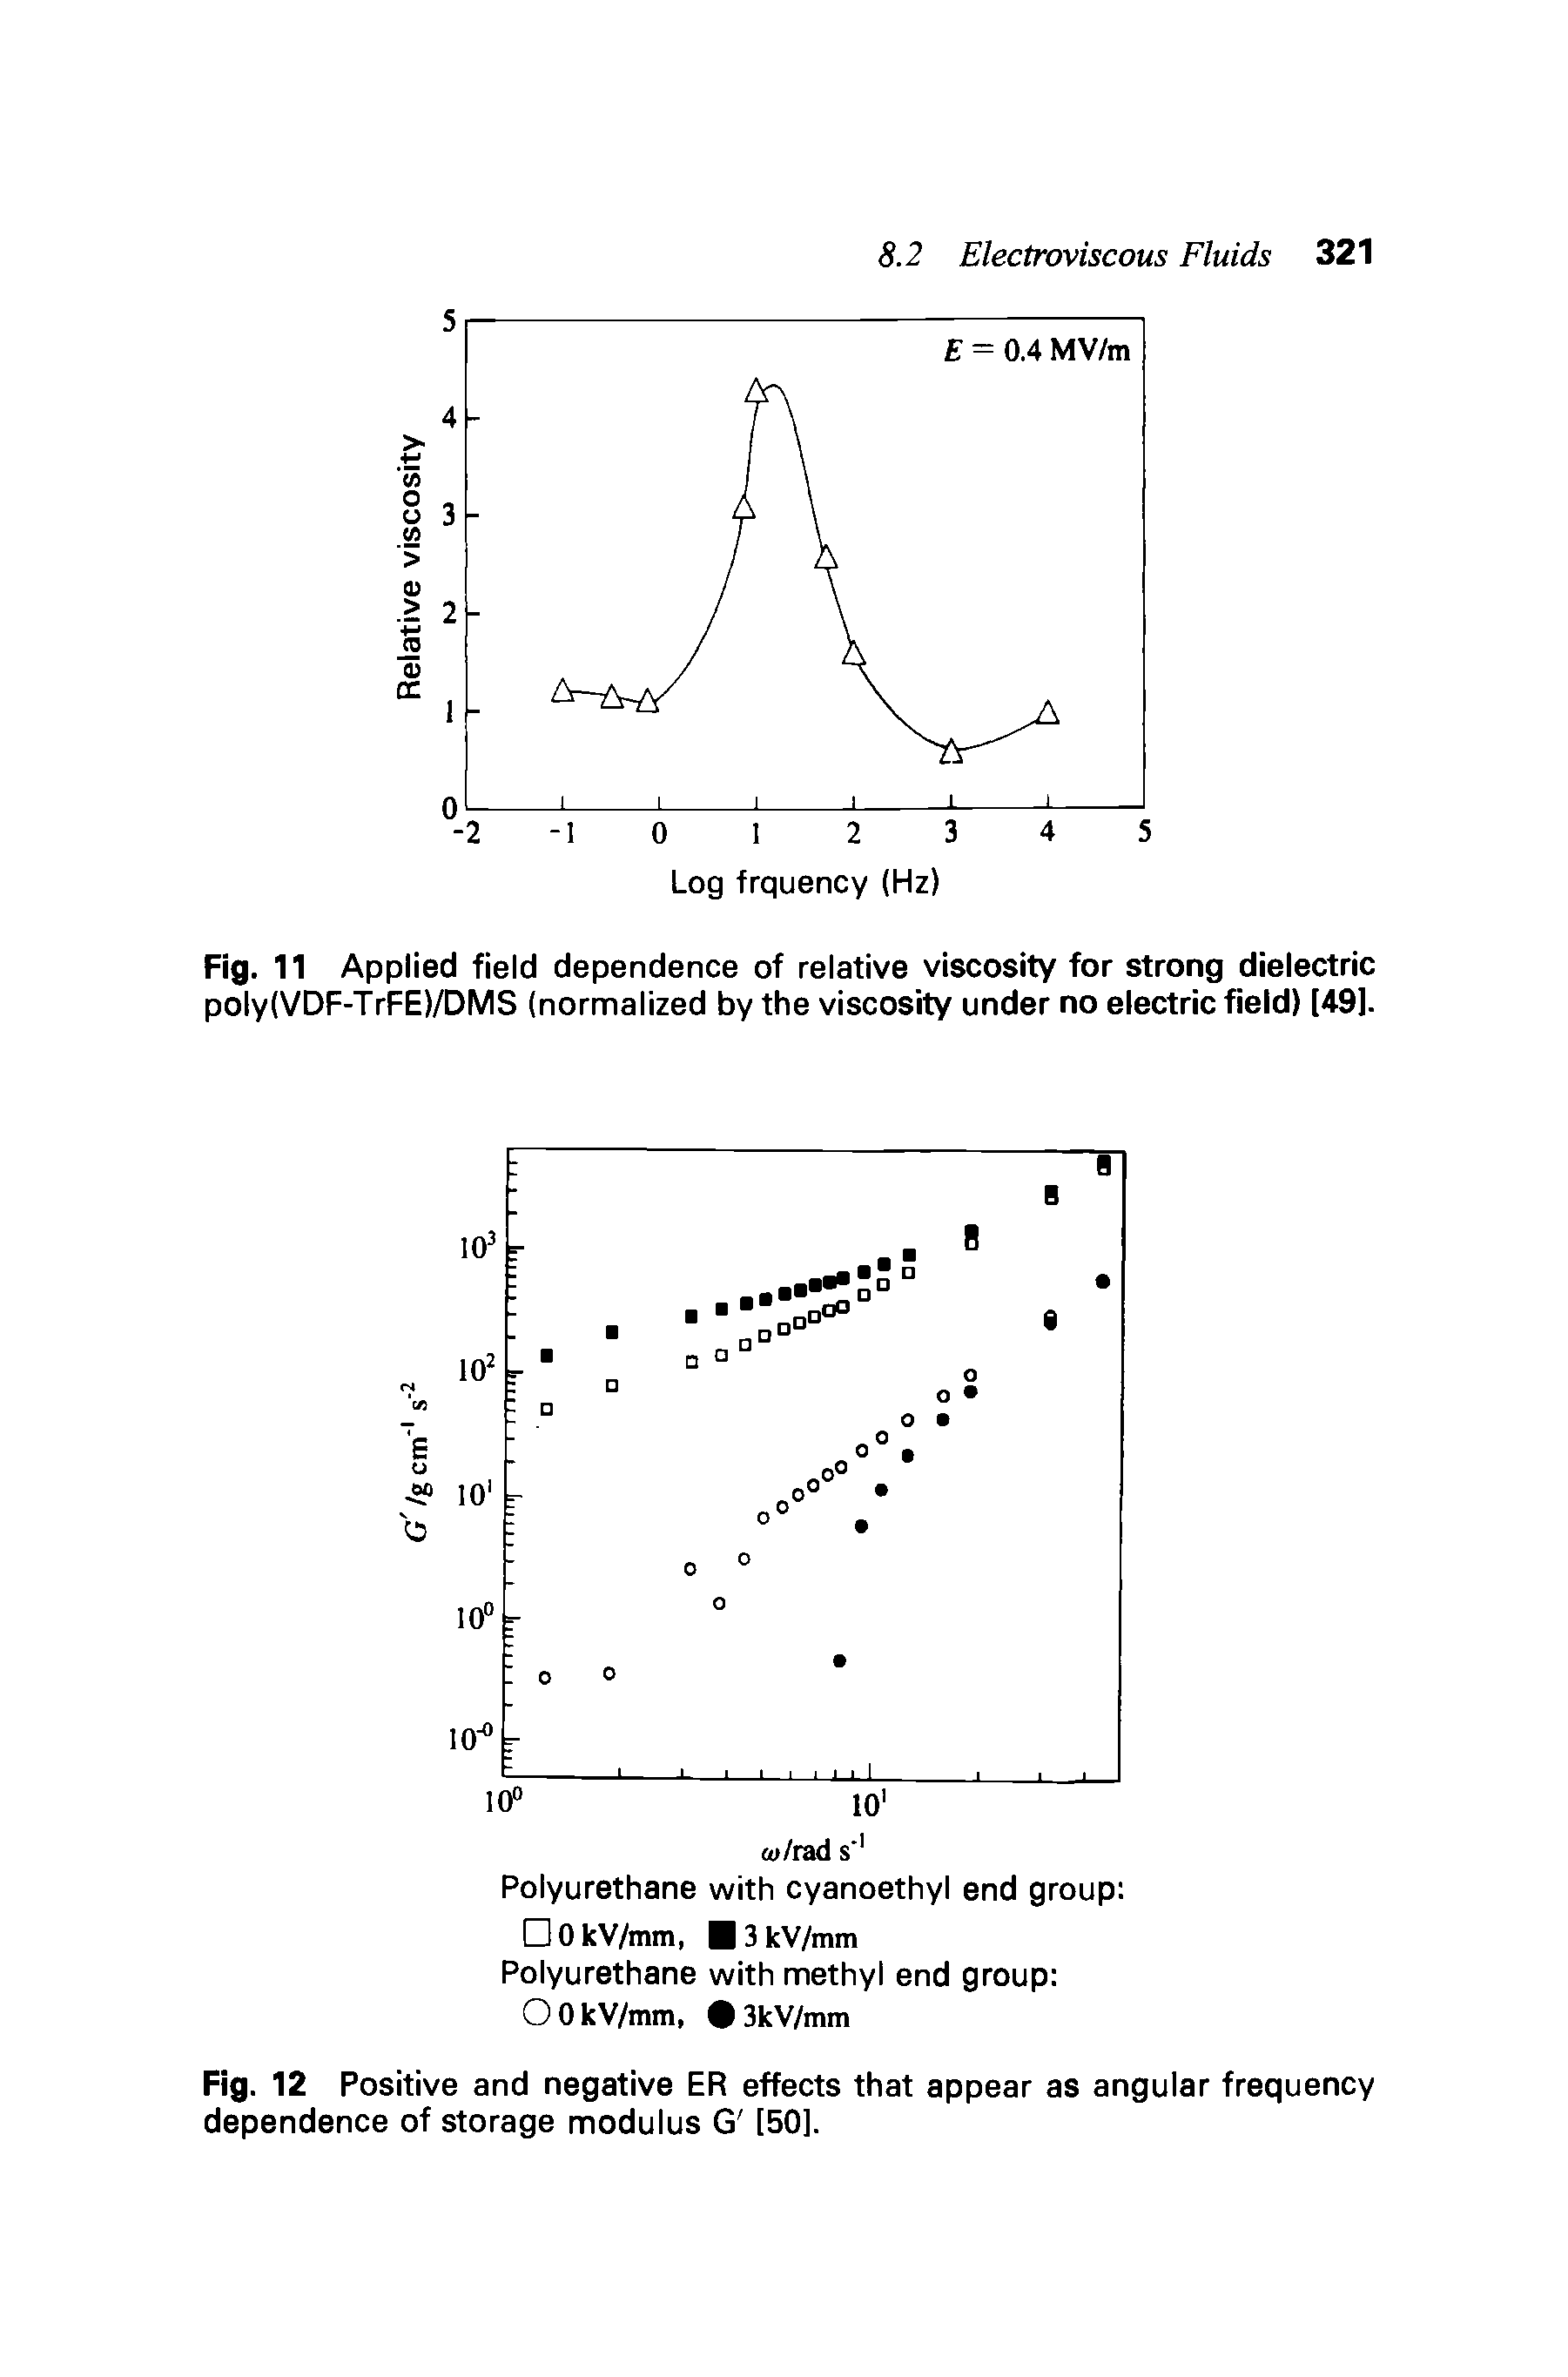 Fig. 11 Applied field dependence of relative viscosity for strong dielectric poly(VDF-TrFE)/DMS (normalized by the viscosity under no electric fieid) [491.